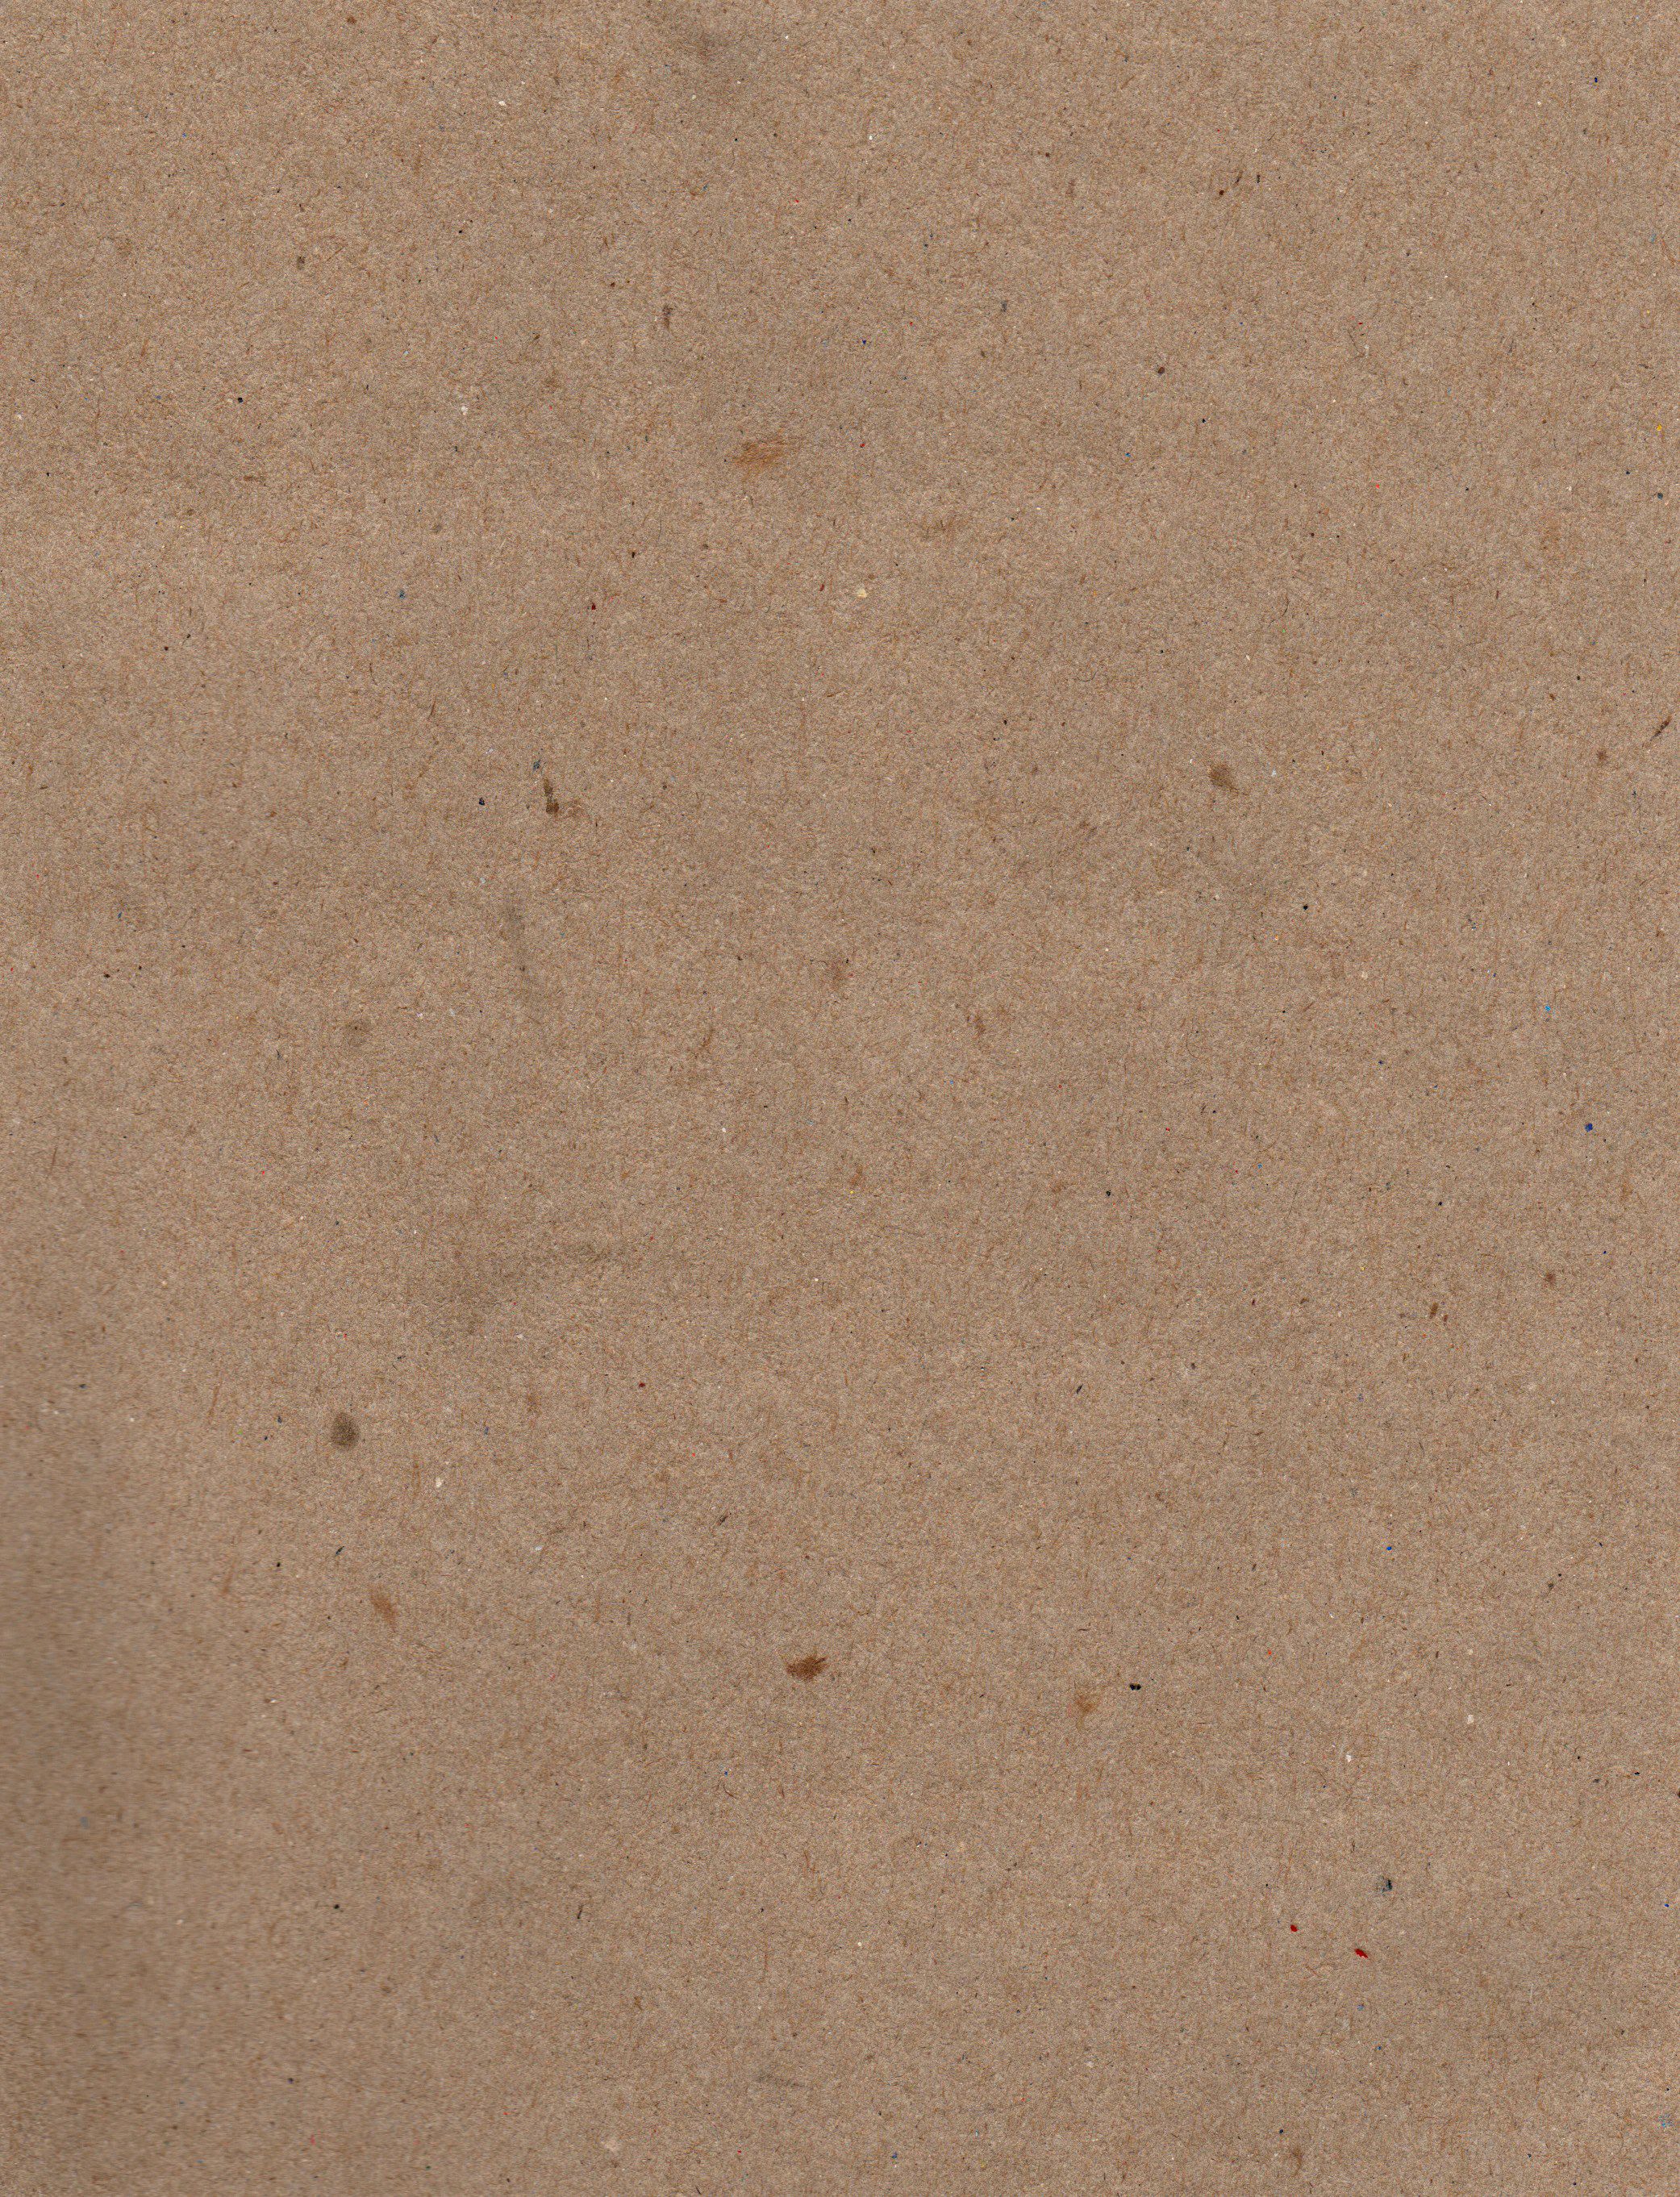 Brown Paper And Cardboard Texture. Paper texture